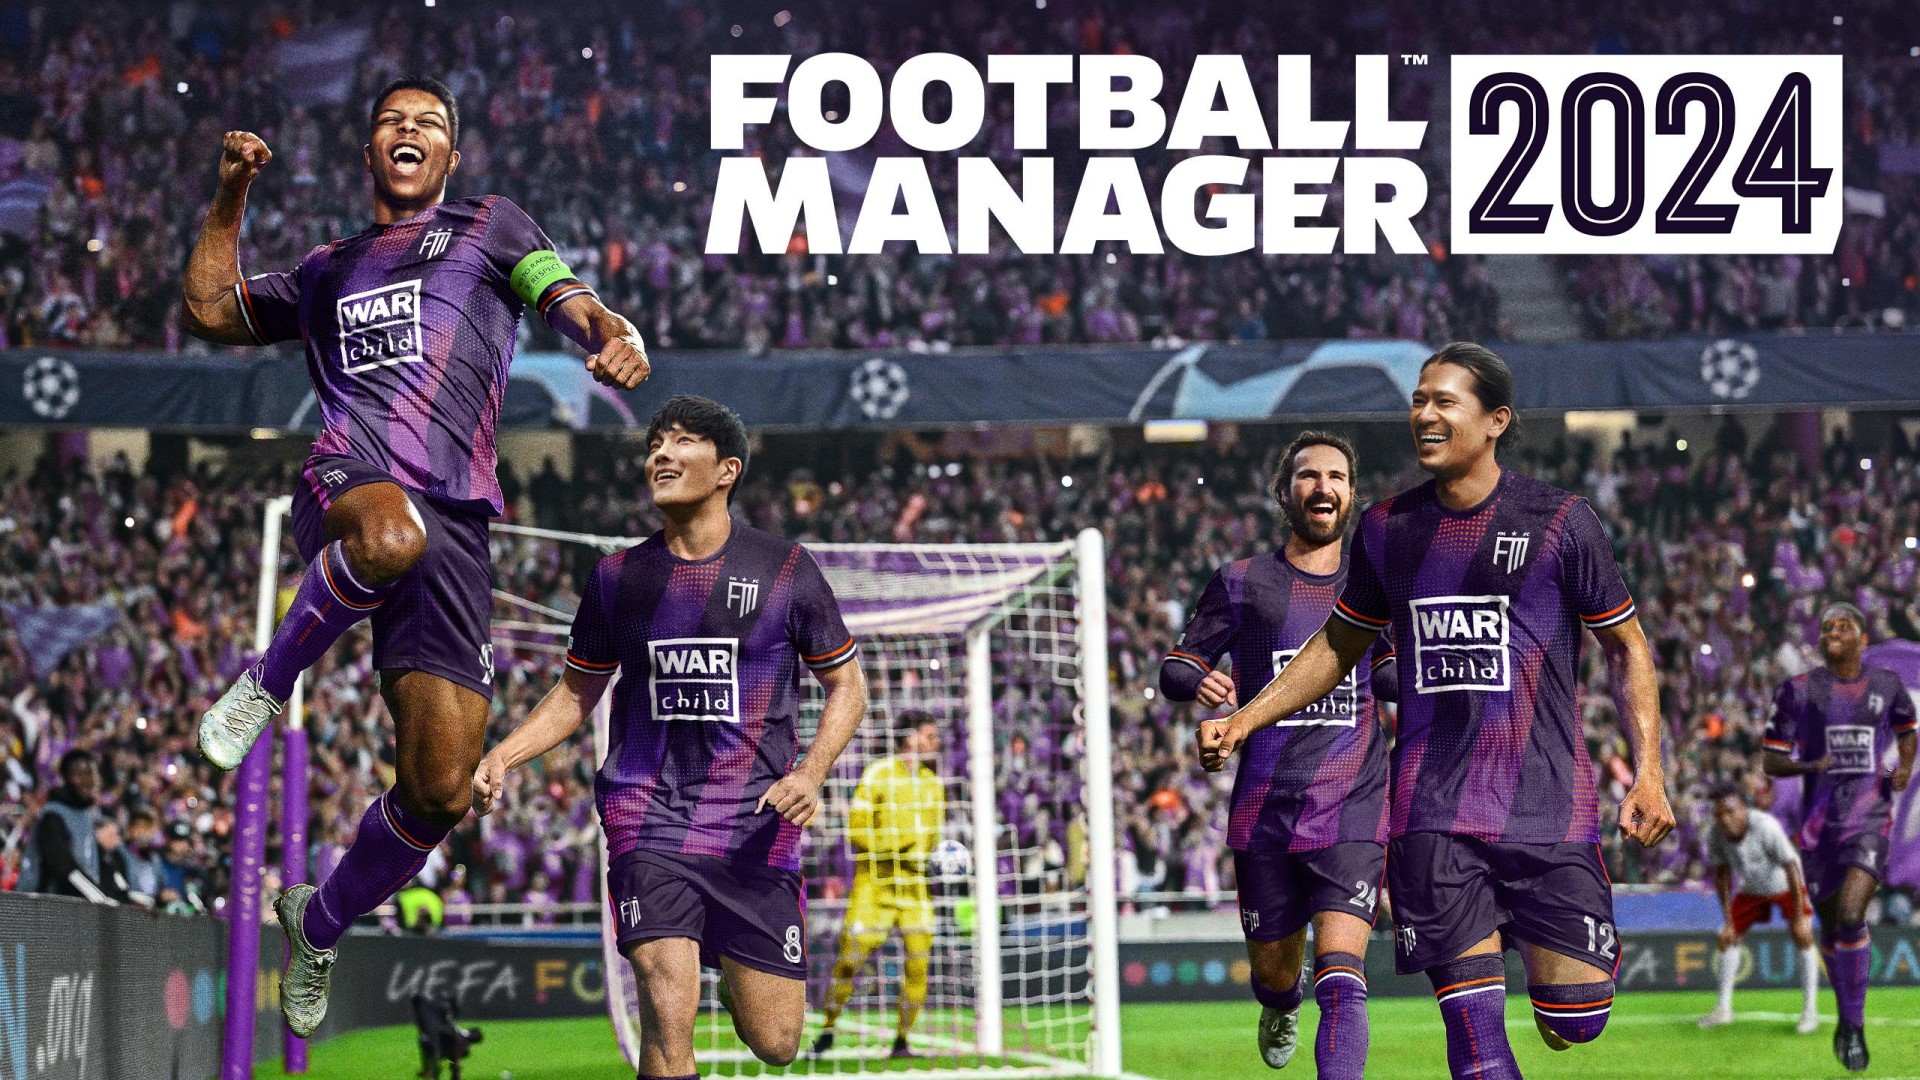 Football Manager 2024 Launches November 6